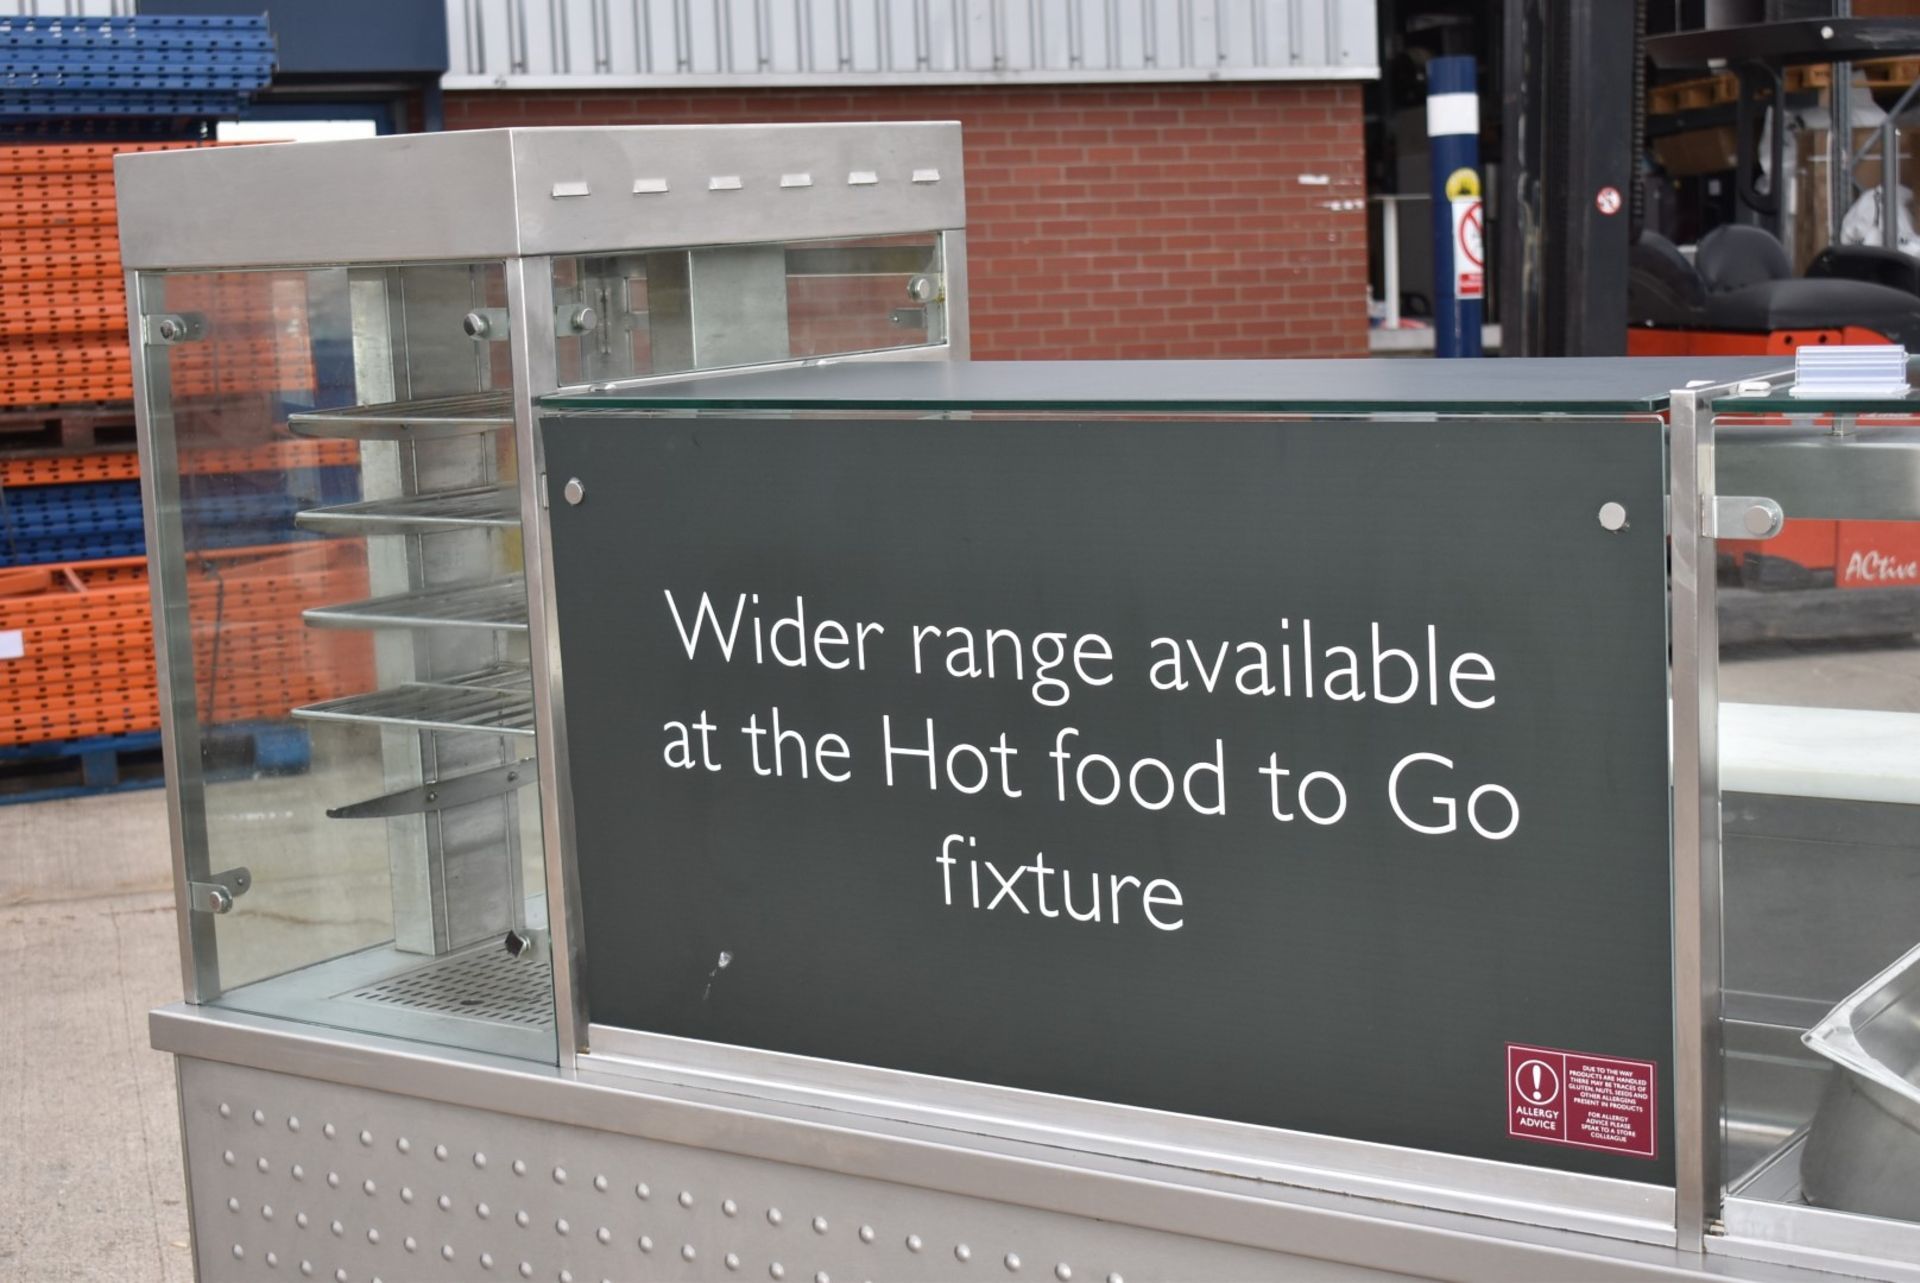 1 x Promart Heated Retail Counter For Take Aways, Hot Food Retail Stores or Canteens etc - - Image 8 of 54